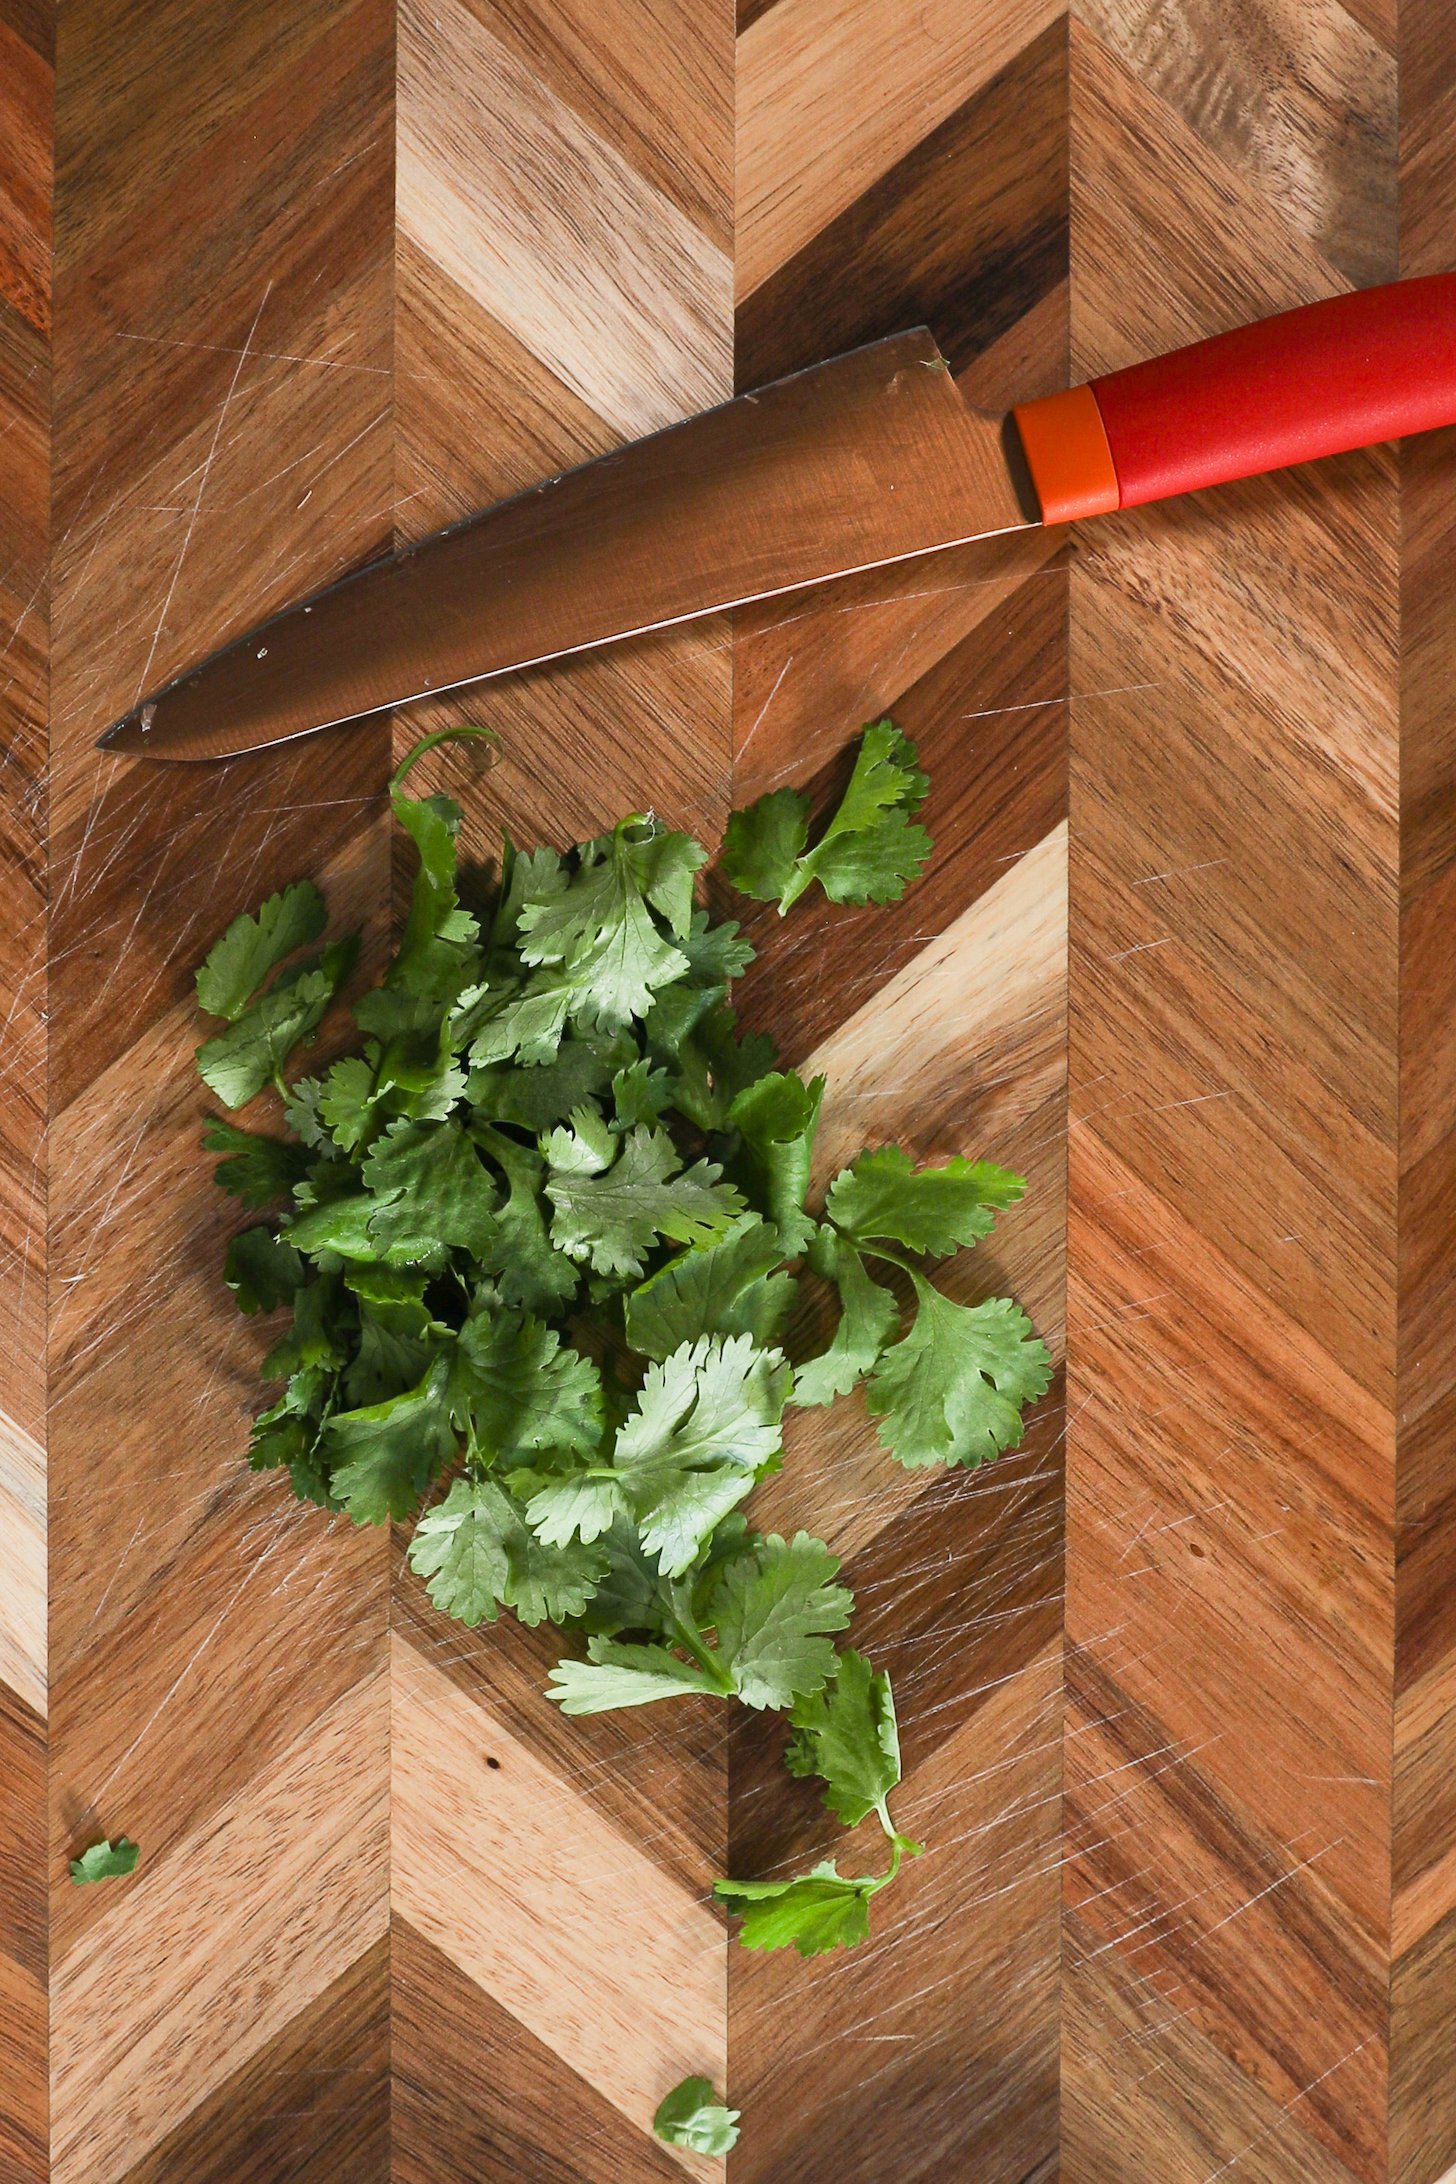 Cilantro leaves and a knife on a chopping board.